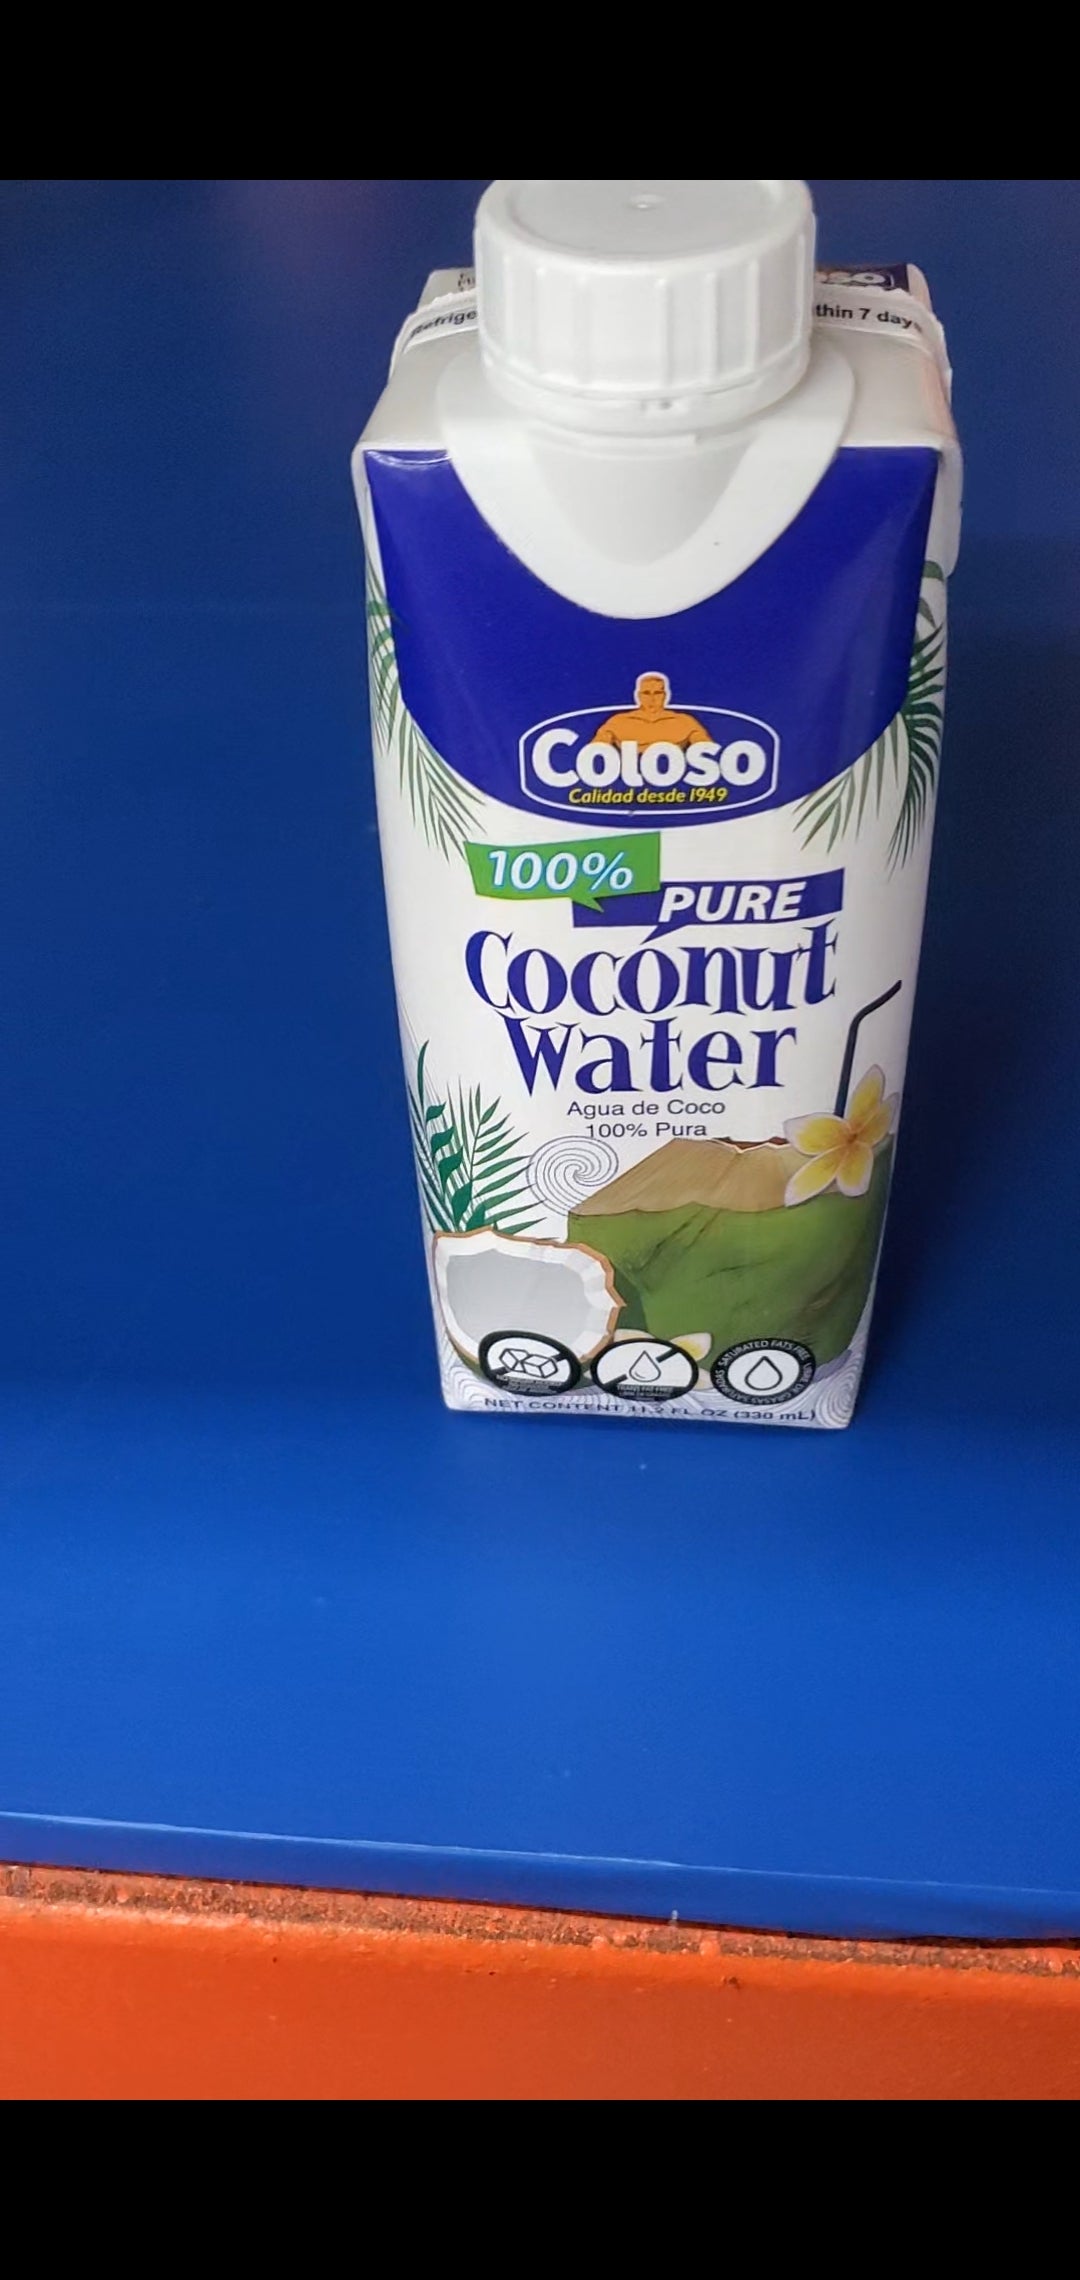 COLOSO COCONUT WATER WITH PULP 11.2 OZ